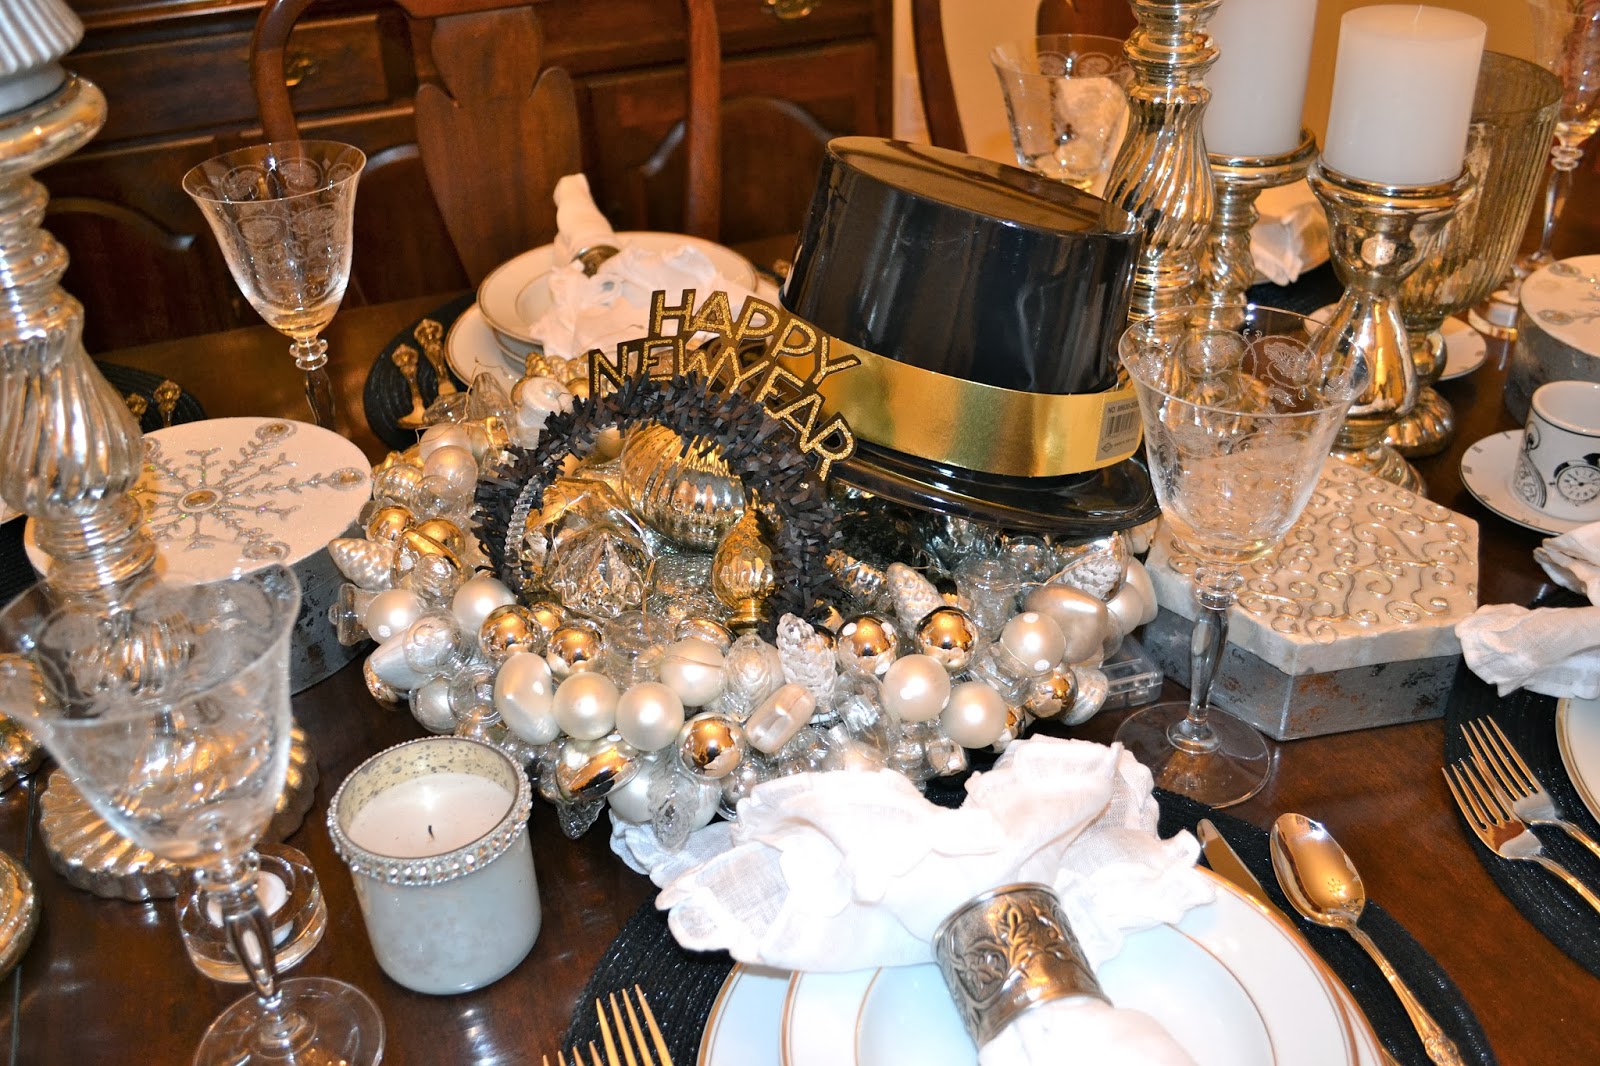 THE FRENCH HUTCH: FOR AULD LANG SYNE AND A THANK-YOU